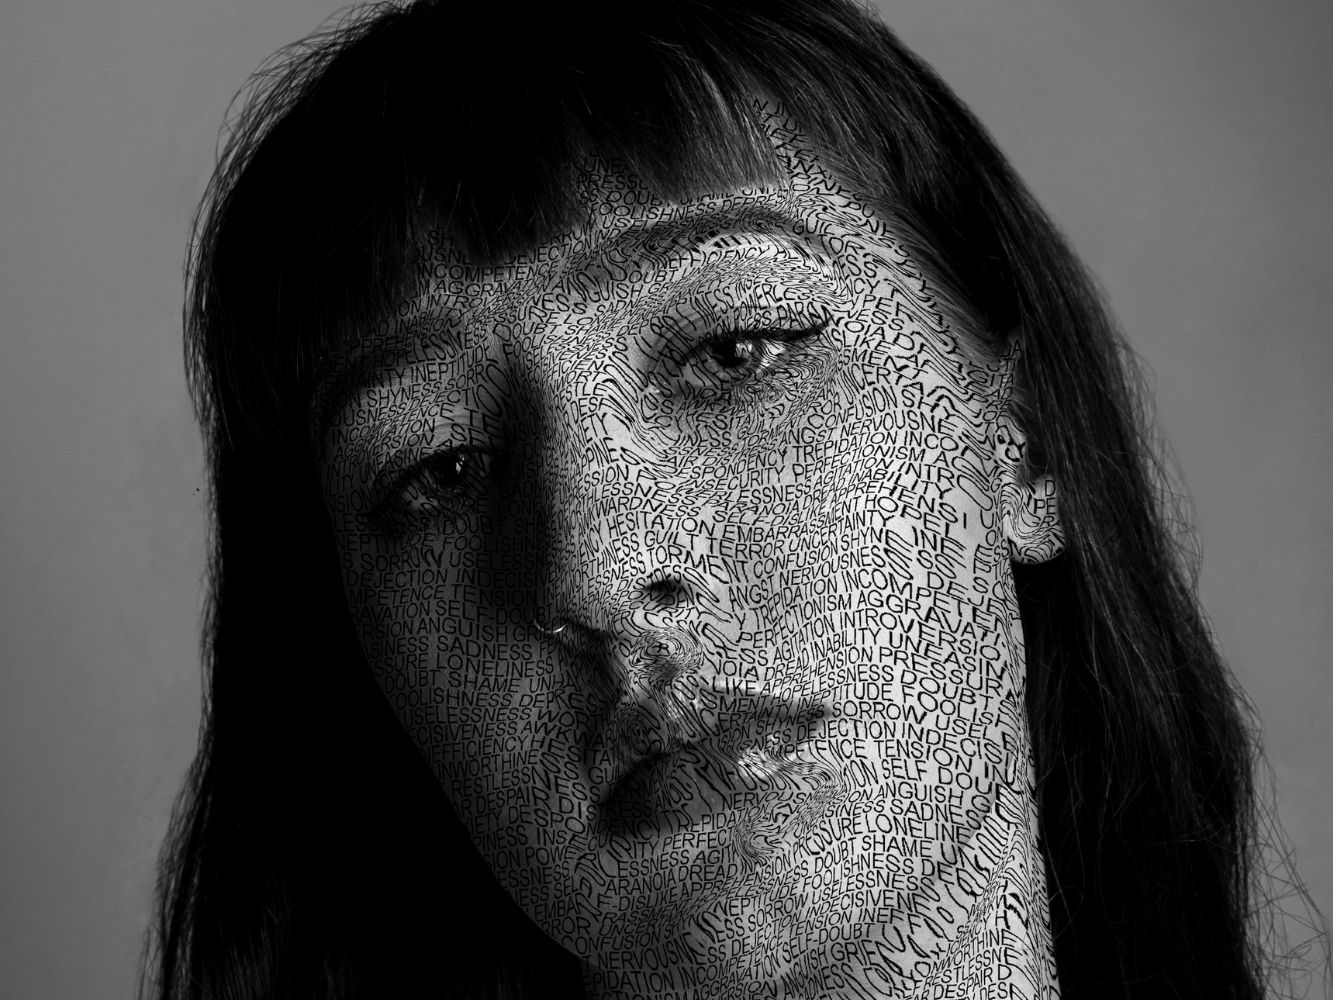 Black and white portrait of Keira Thomson with 'damaging phrases' on her face